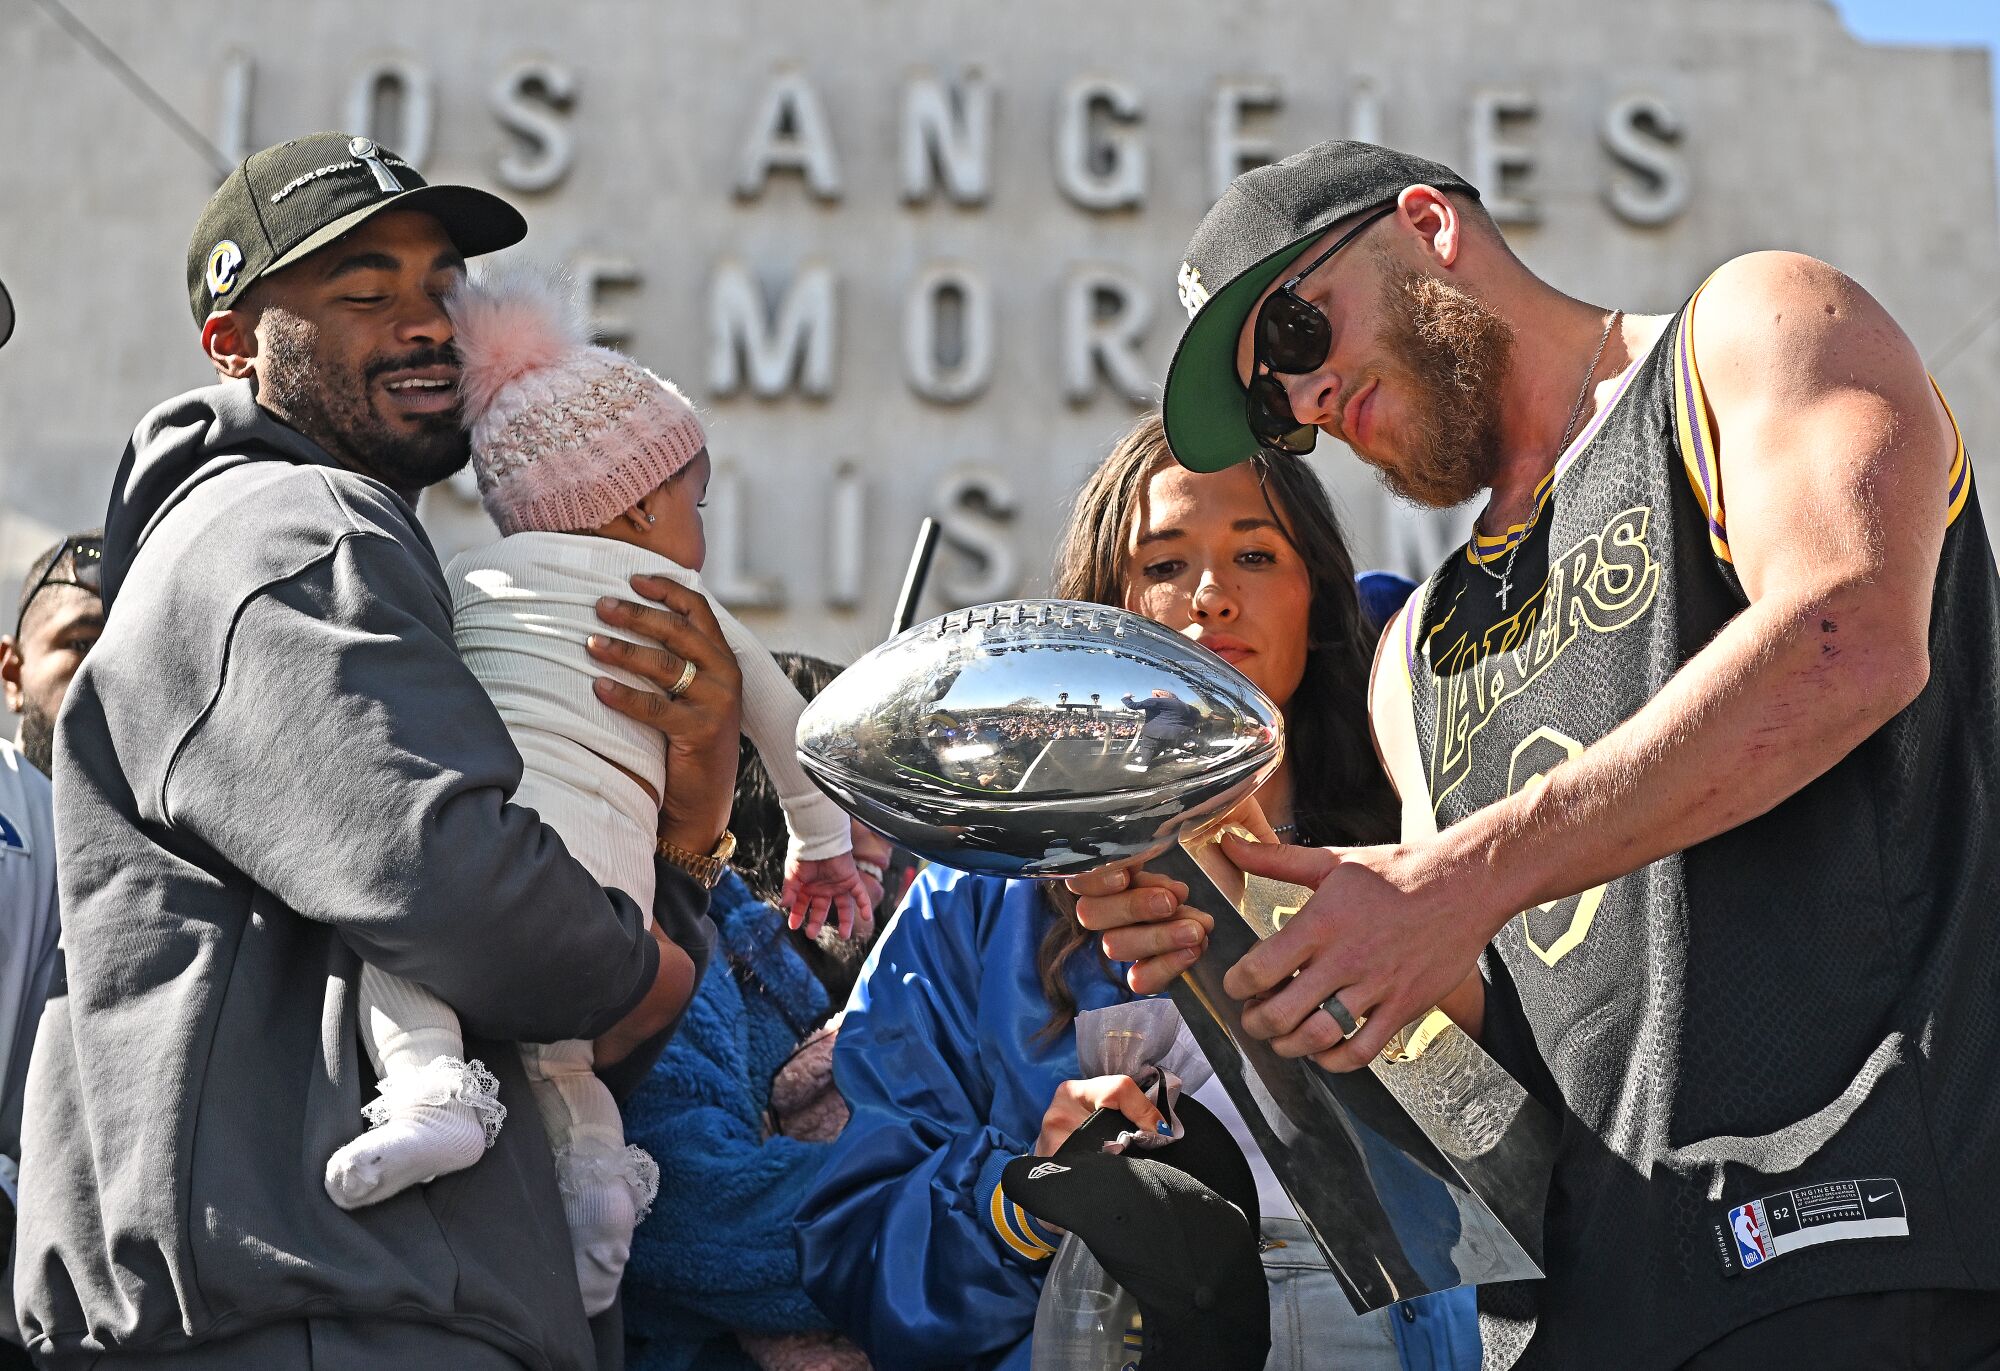 Rams receivers Cooper Kupp, right, and Robert Woods gather with the trophy during the Super Bowl celebration in Los Angeles.